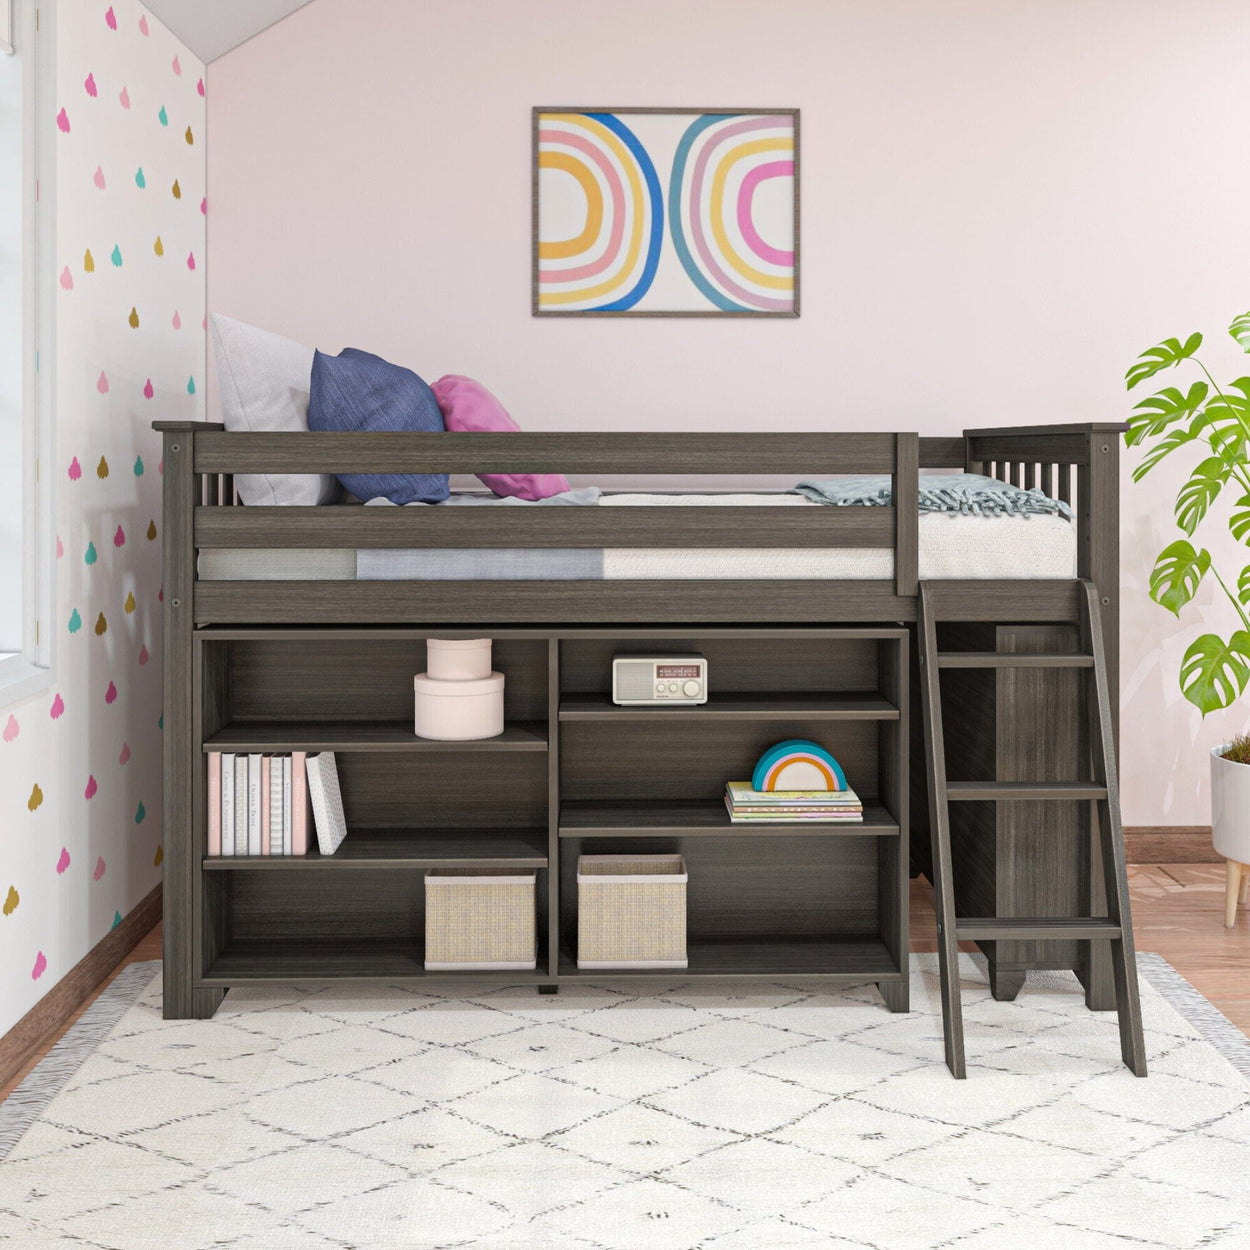 18-3B6B-151 : Loft Beds Twin-Size Low Loft with 3-Shelf Bookcase and 6-Shelf Bookcase, Clay